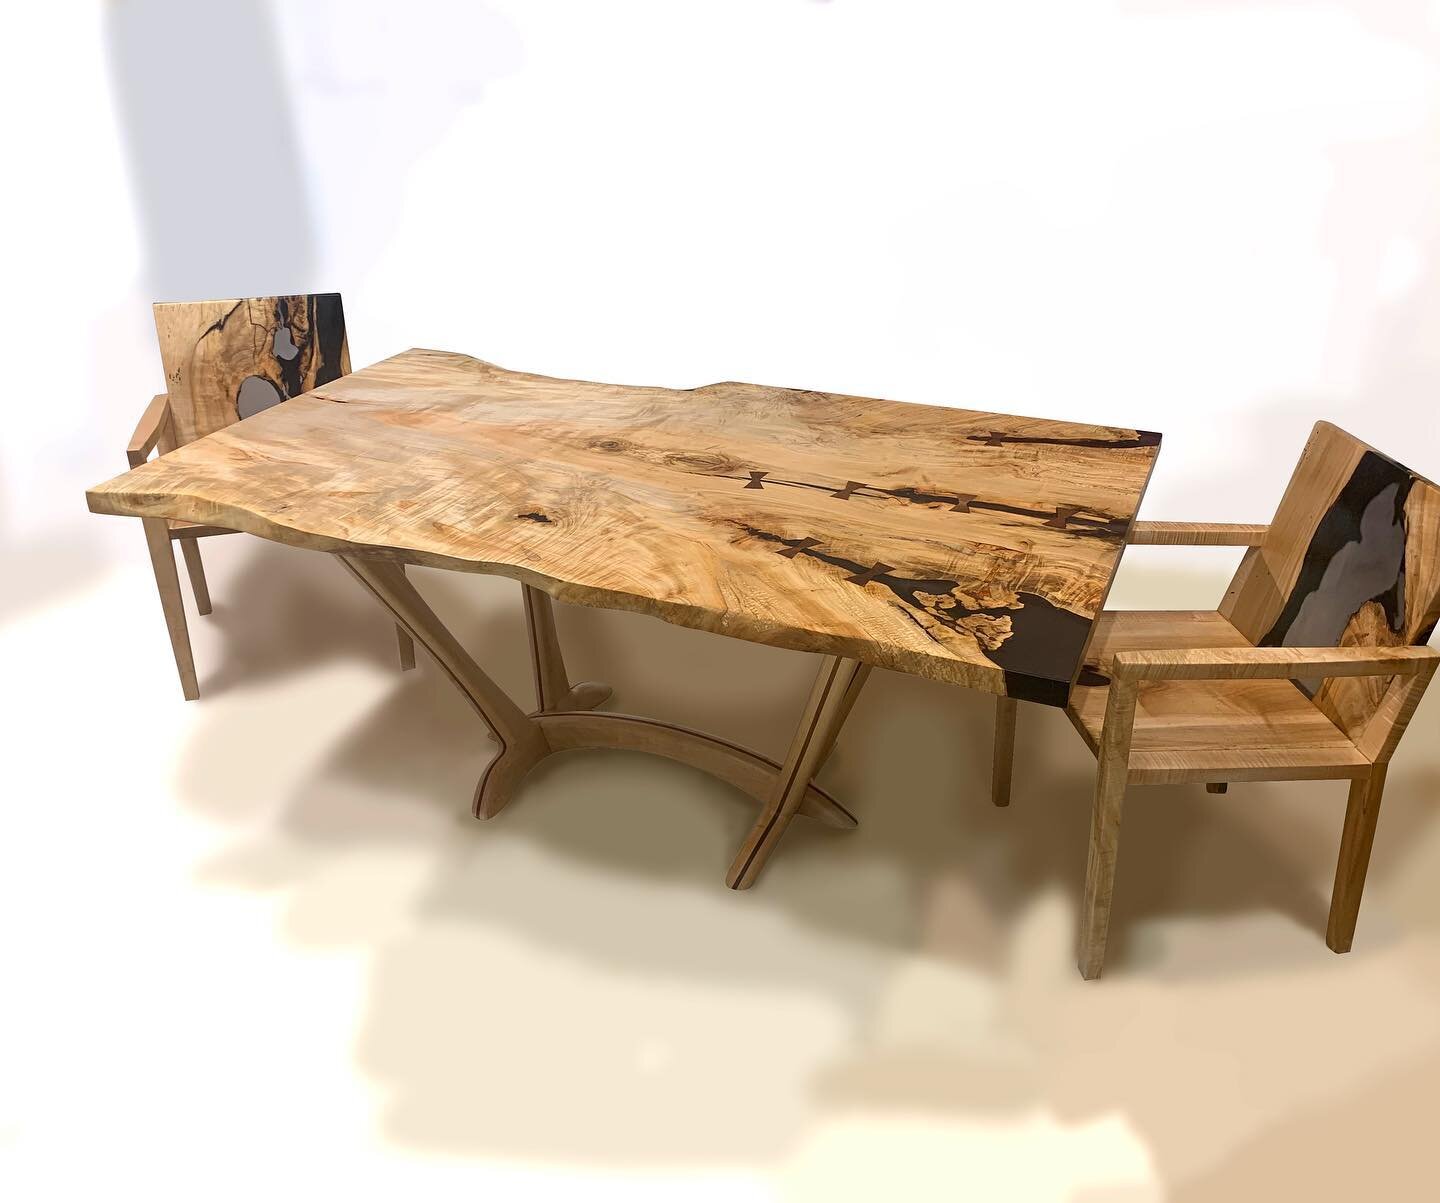 New Rylander table and Lowry chairs now available for custom order! #furniture #furnituredesign #design #interiordesign #table #diningroom #diningtable #custommade #custom #luxury #luxuryhomes #woodworking #woodwork #art #artistsoninstagram #artist #